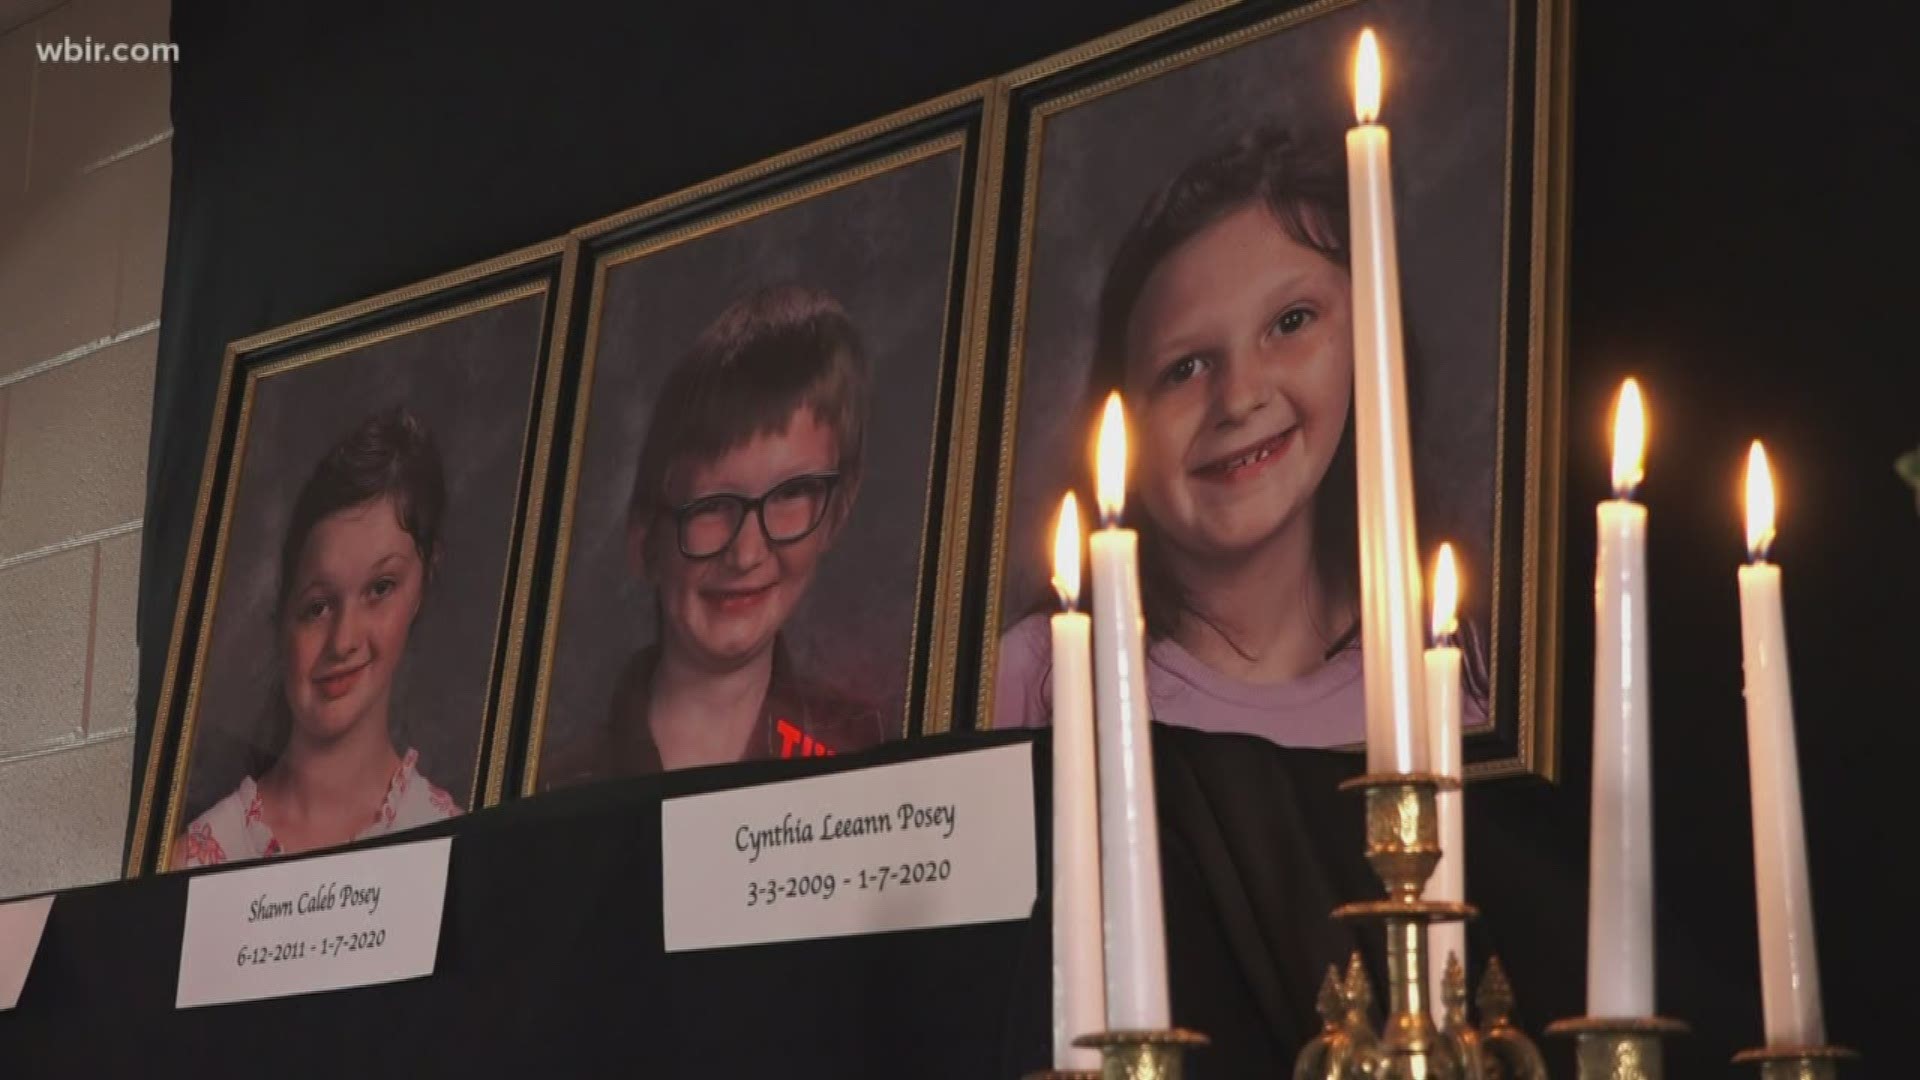 The principal says what she's most proud of is how the school pulled together through Tuesday's tragedy after three siblings and their grandmother died in a fire.